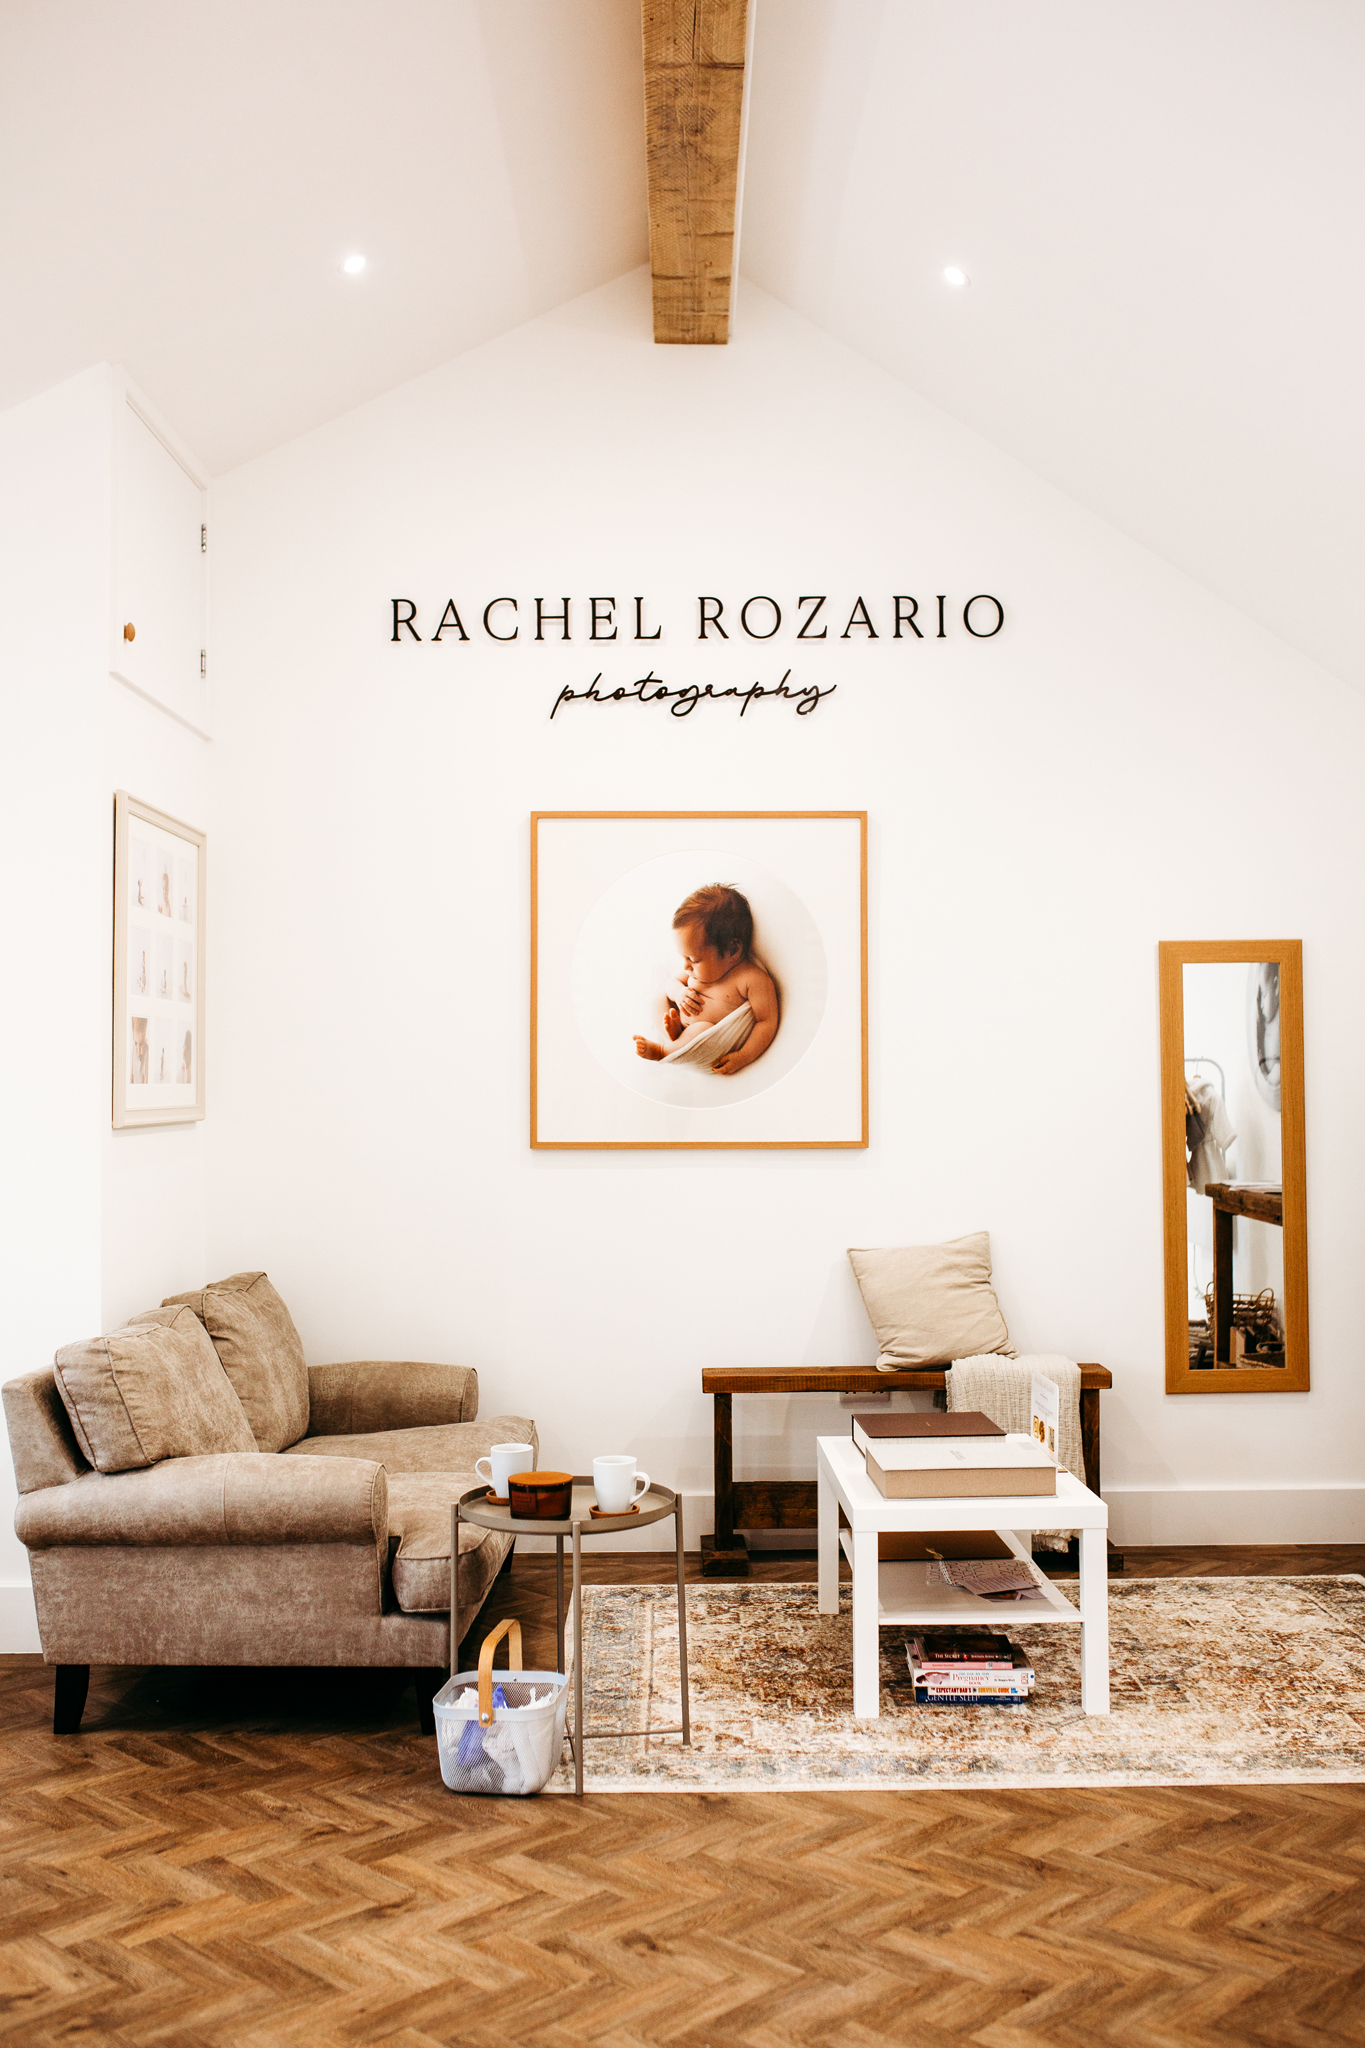 Photography of wall art and client seating area in Rachel Rozario's photography studio on the Wirral.